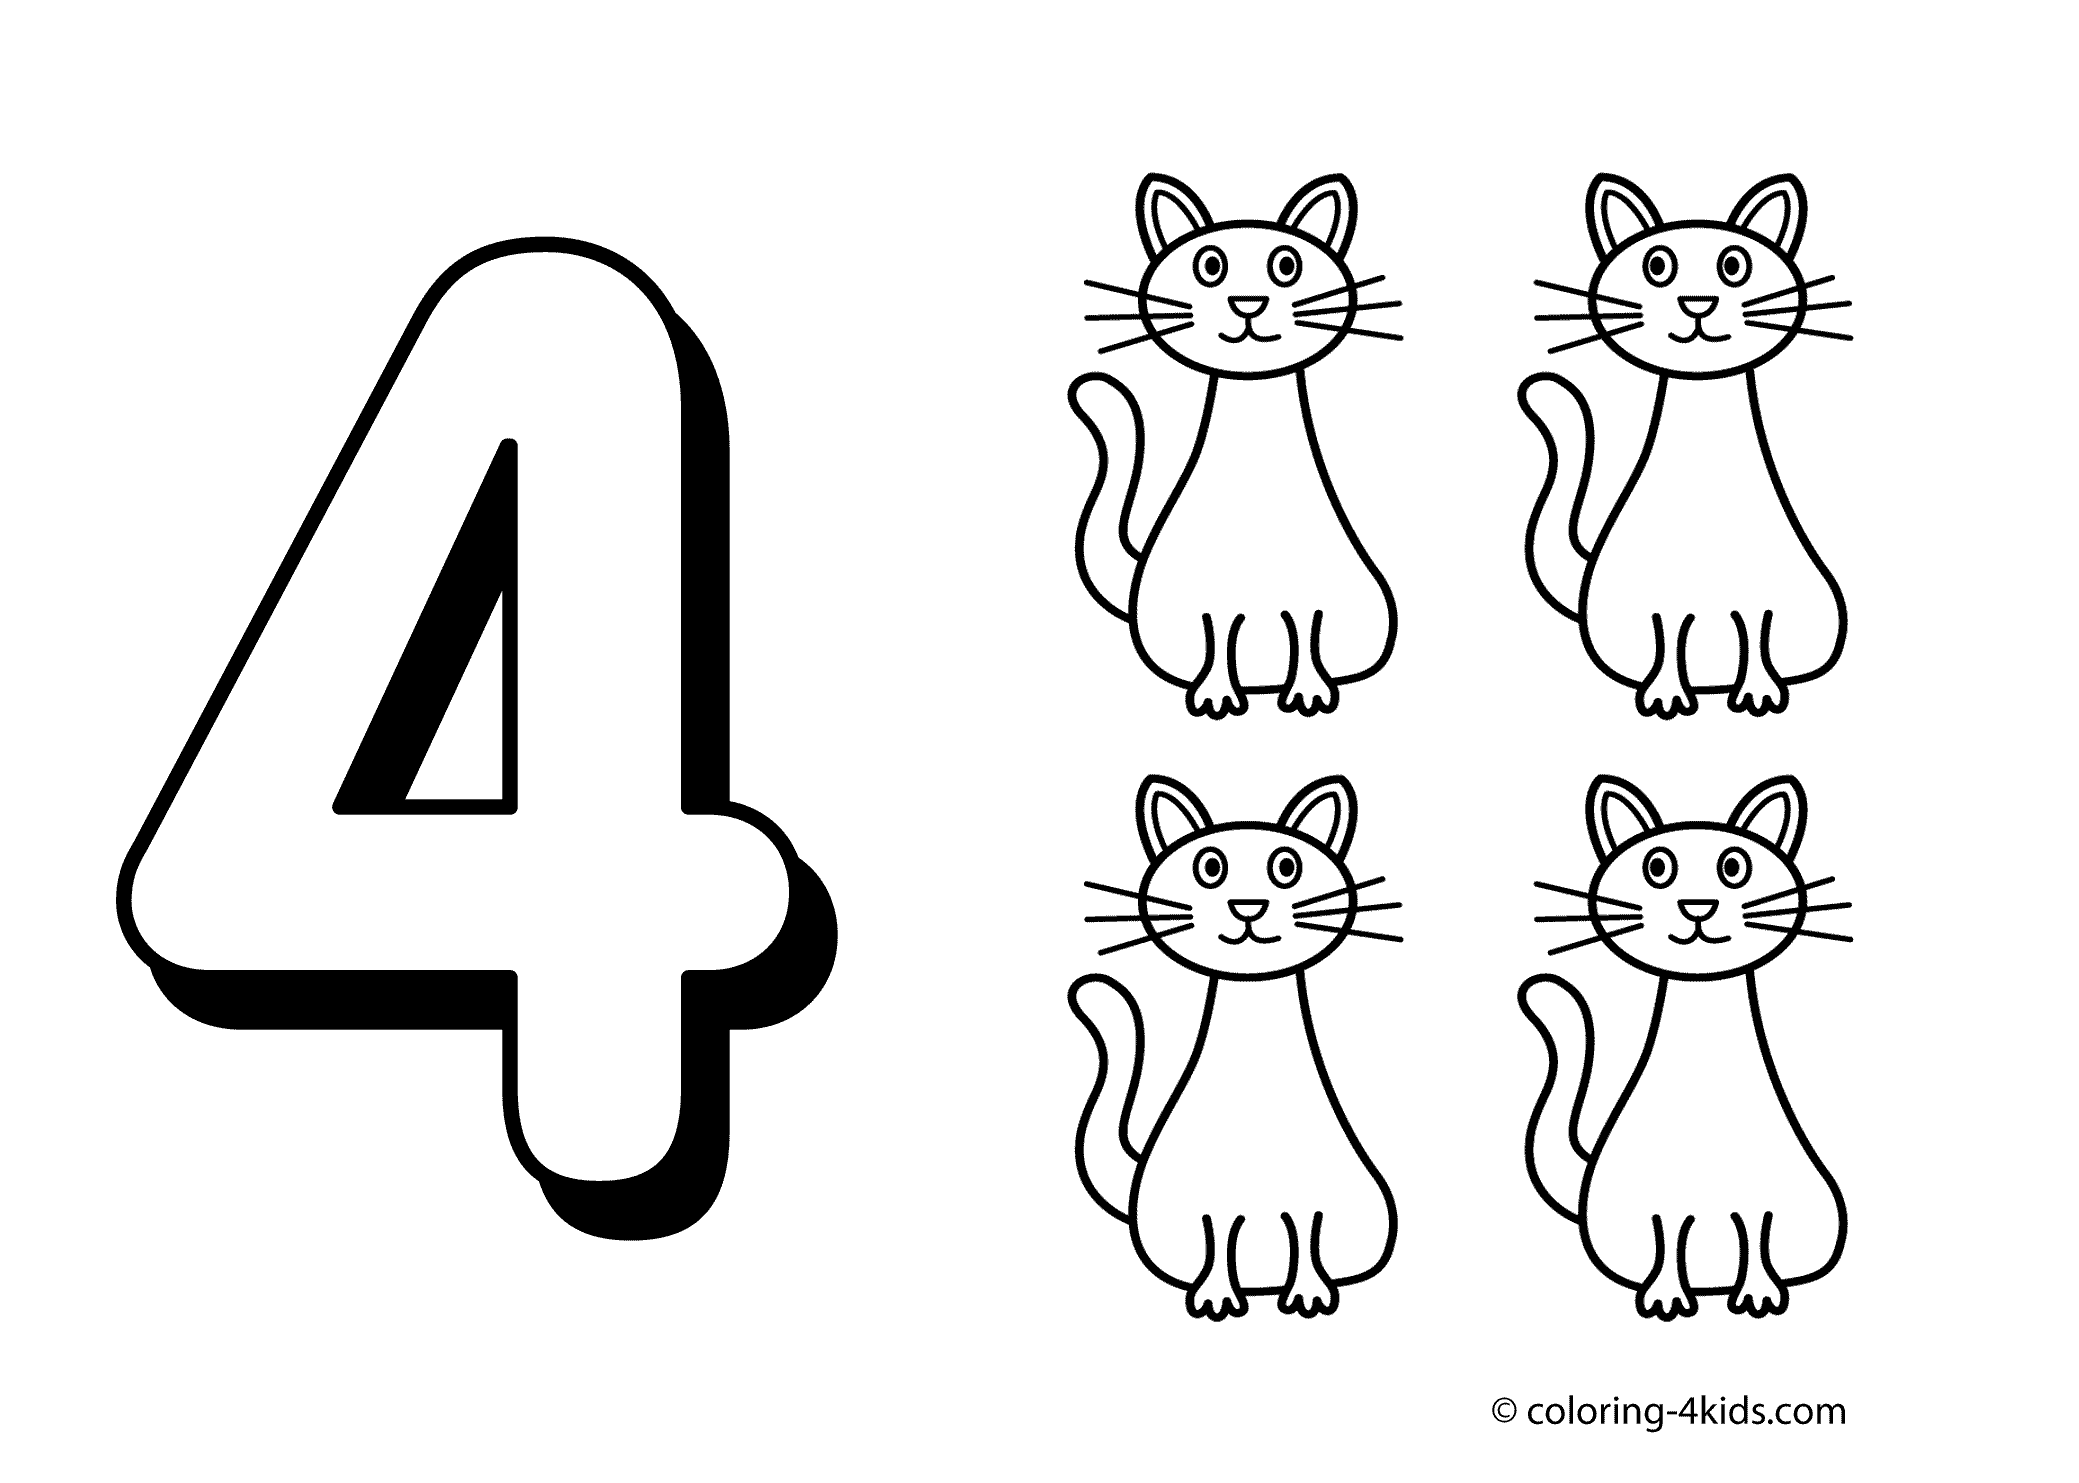 Number 4 Coloring Sheet Printable Coloring Pages